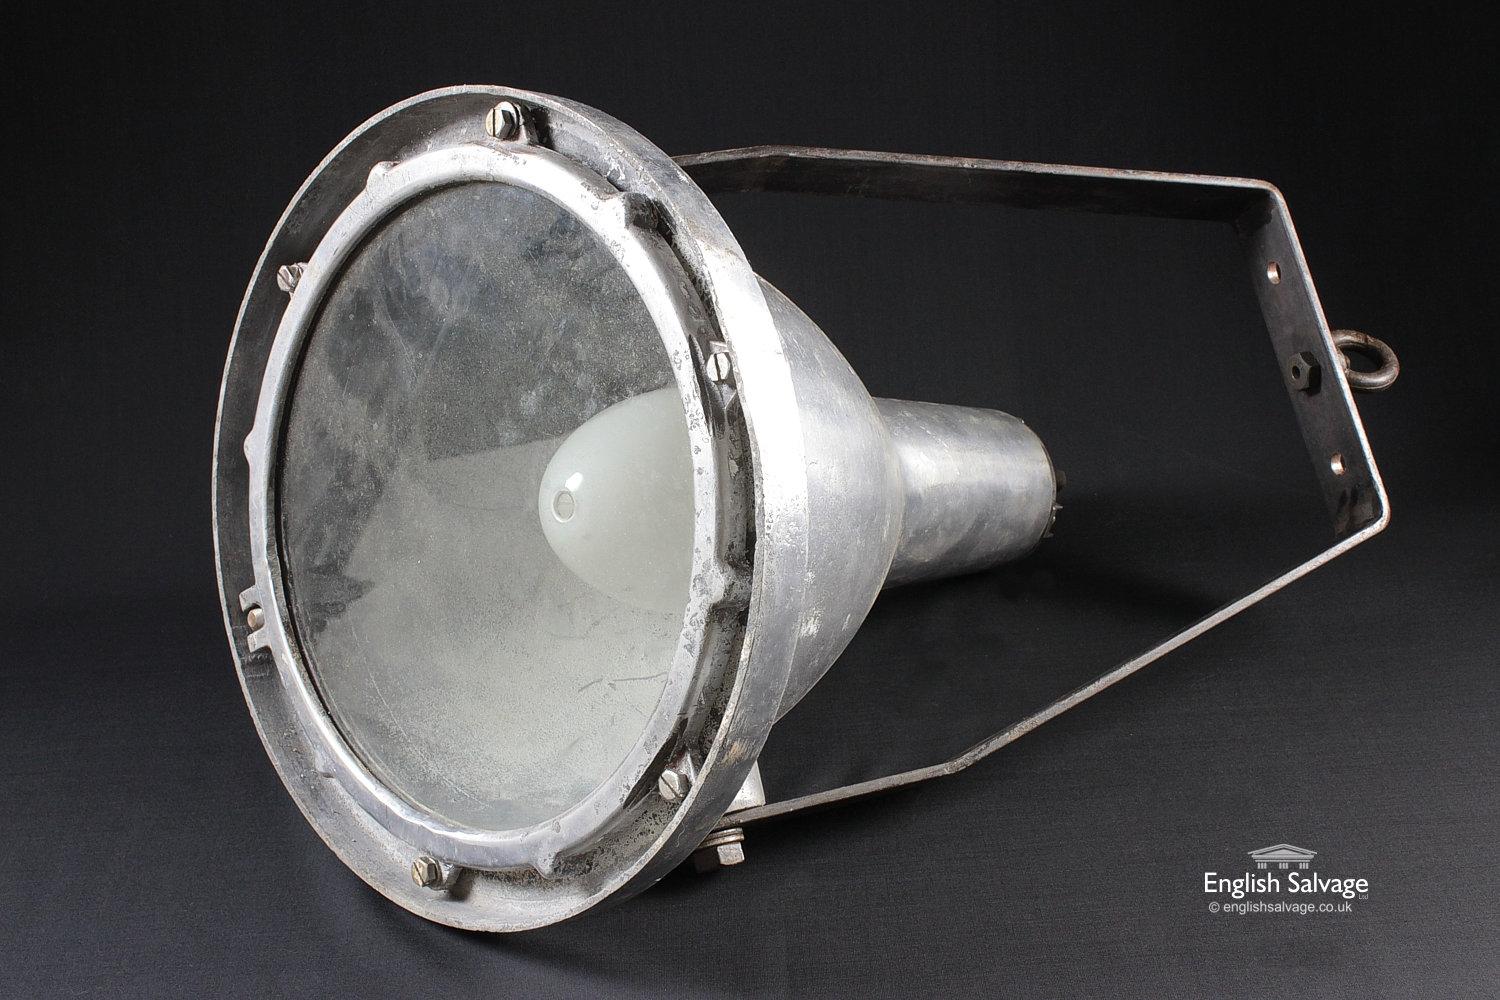 Aluminum conical ship lights/spotlights within a rotating, hanging frame/bracket.

Frame/bracket can be removed.

All electrical work/installation must be undertaken by a qualified electrician.